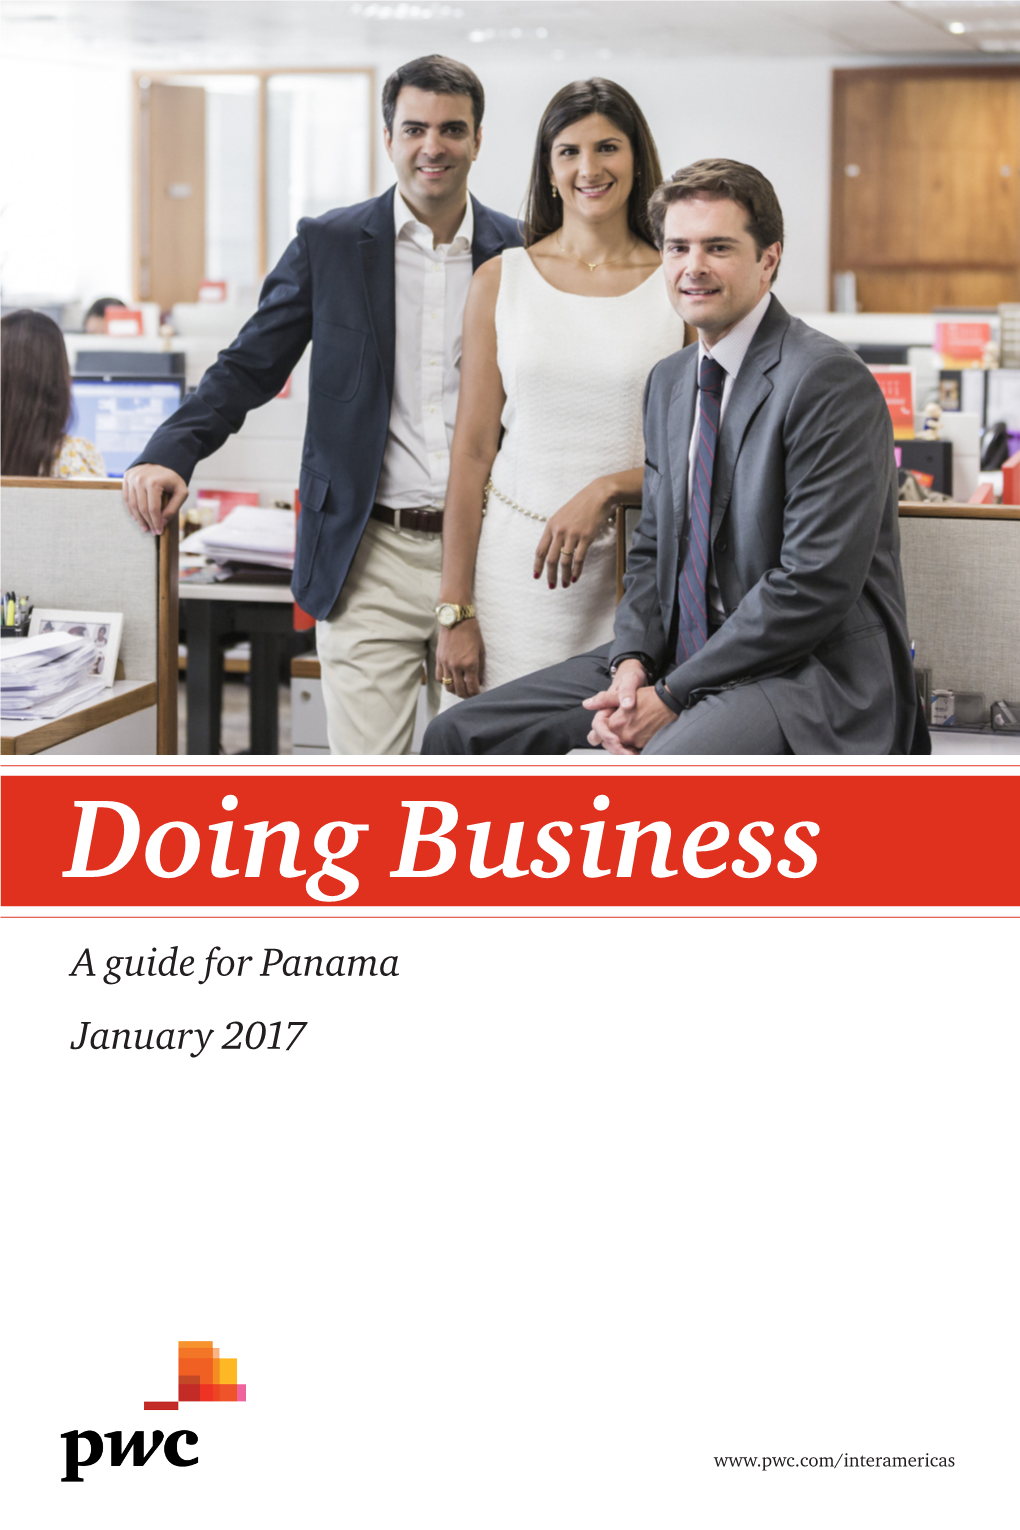 Doing Business: a Guide for Panama